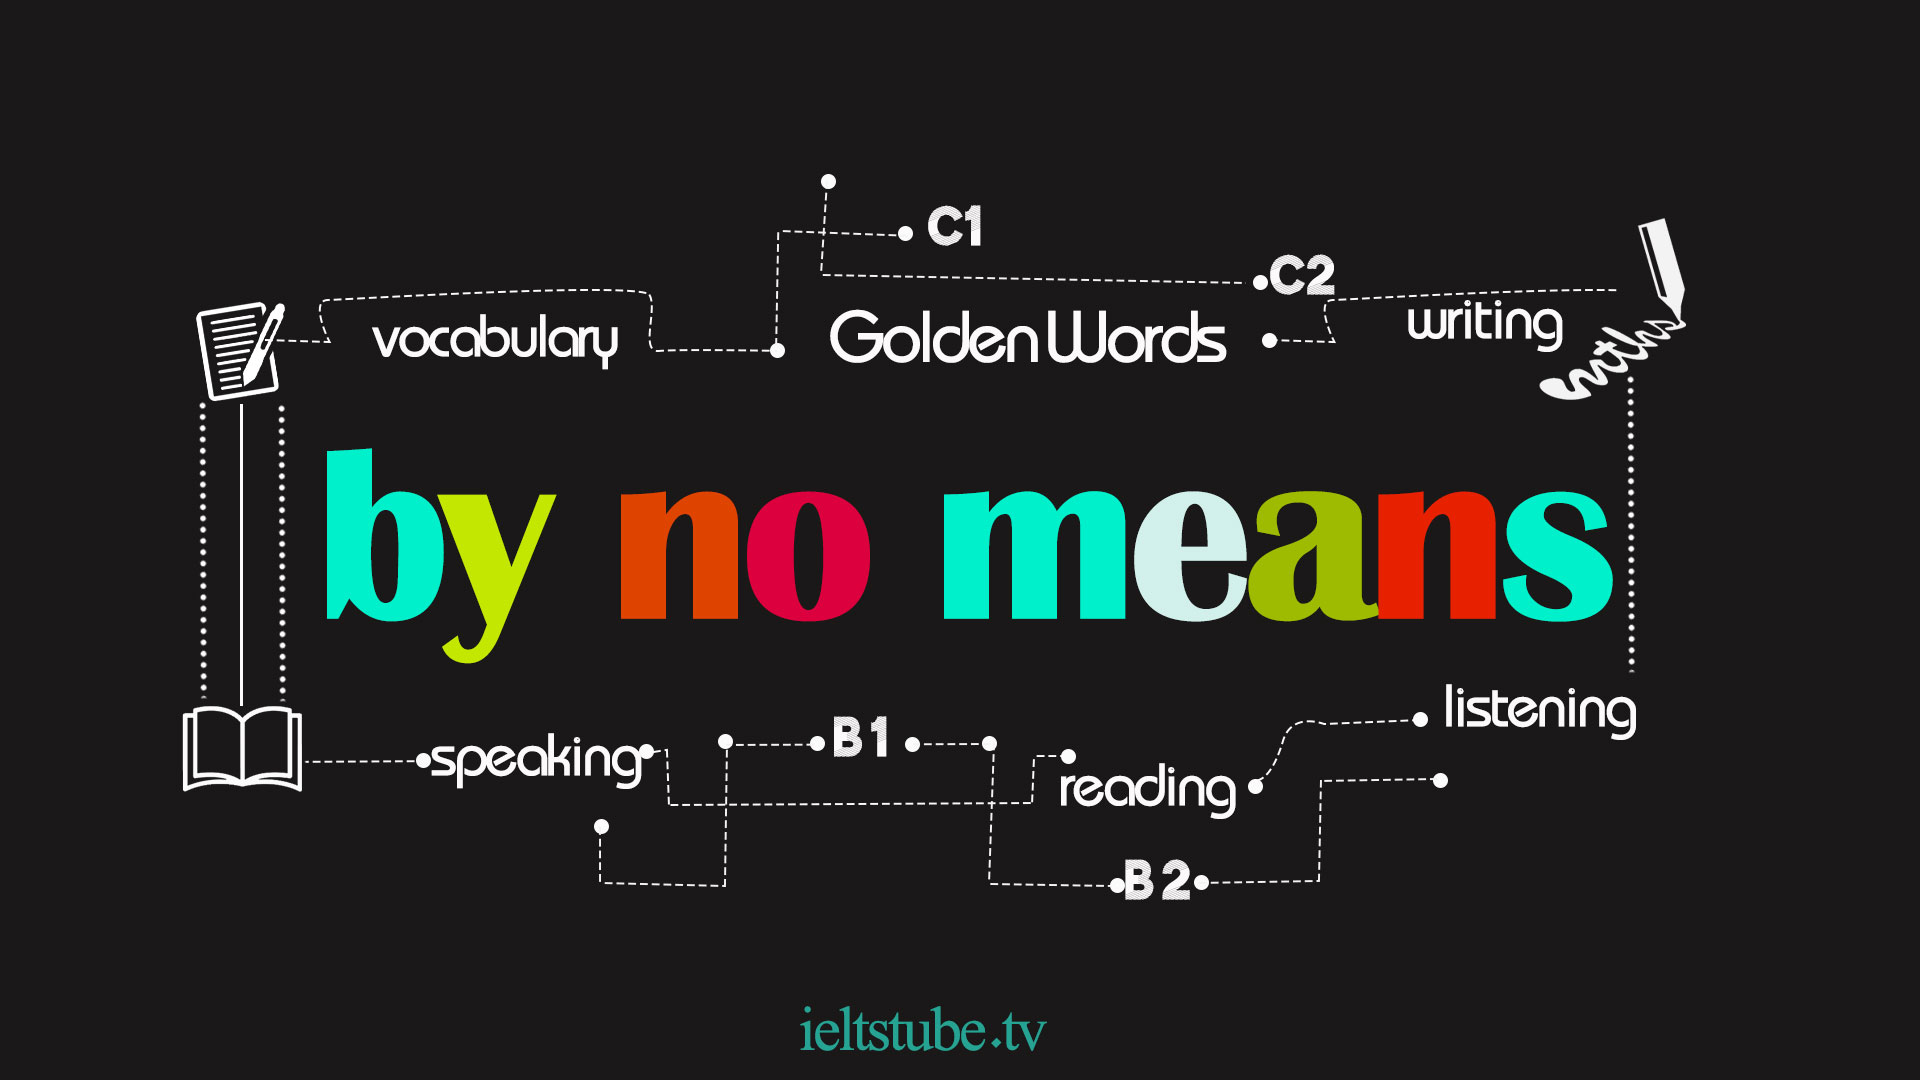 by no means (Poster)